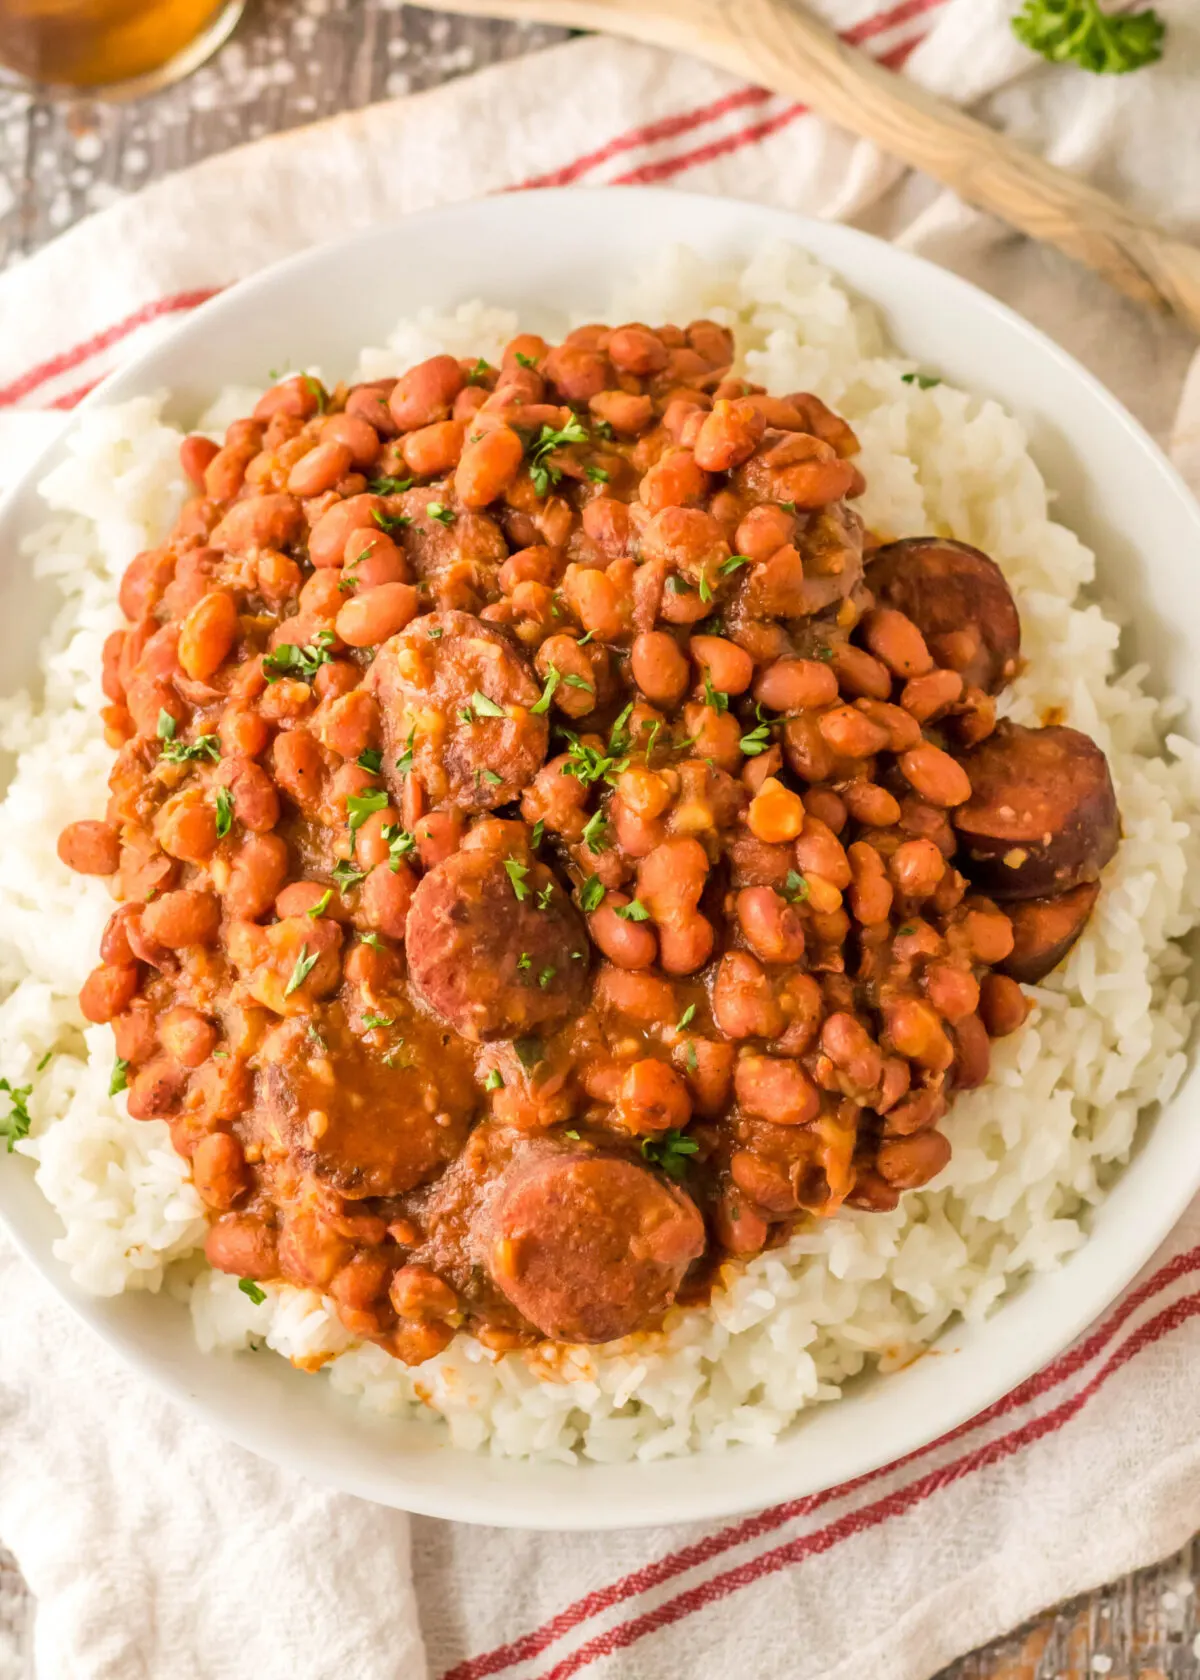 Overhead view of a plate of red beans, sausage, and rice.